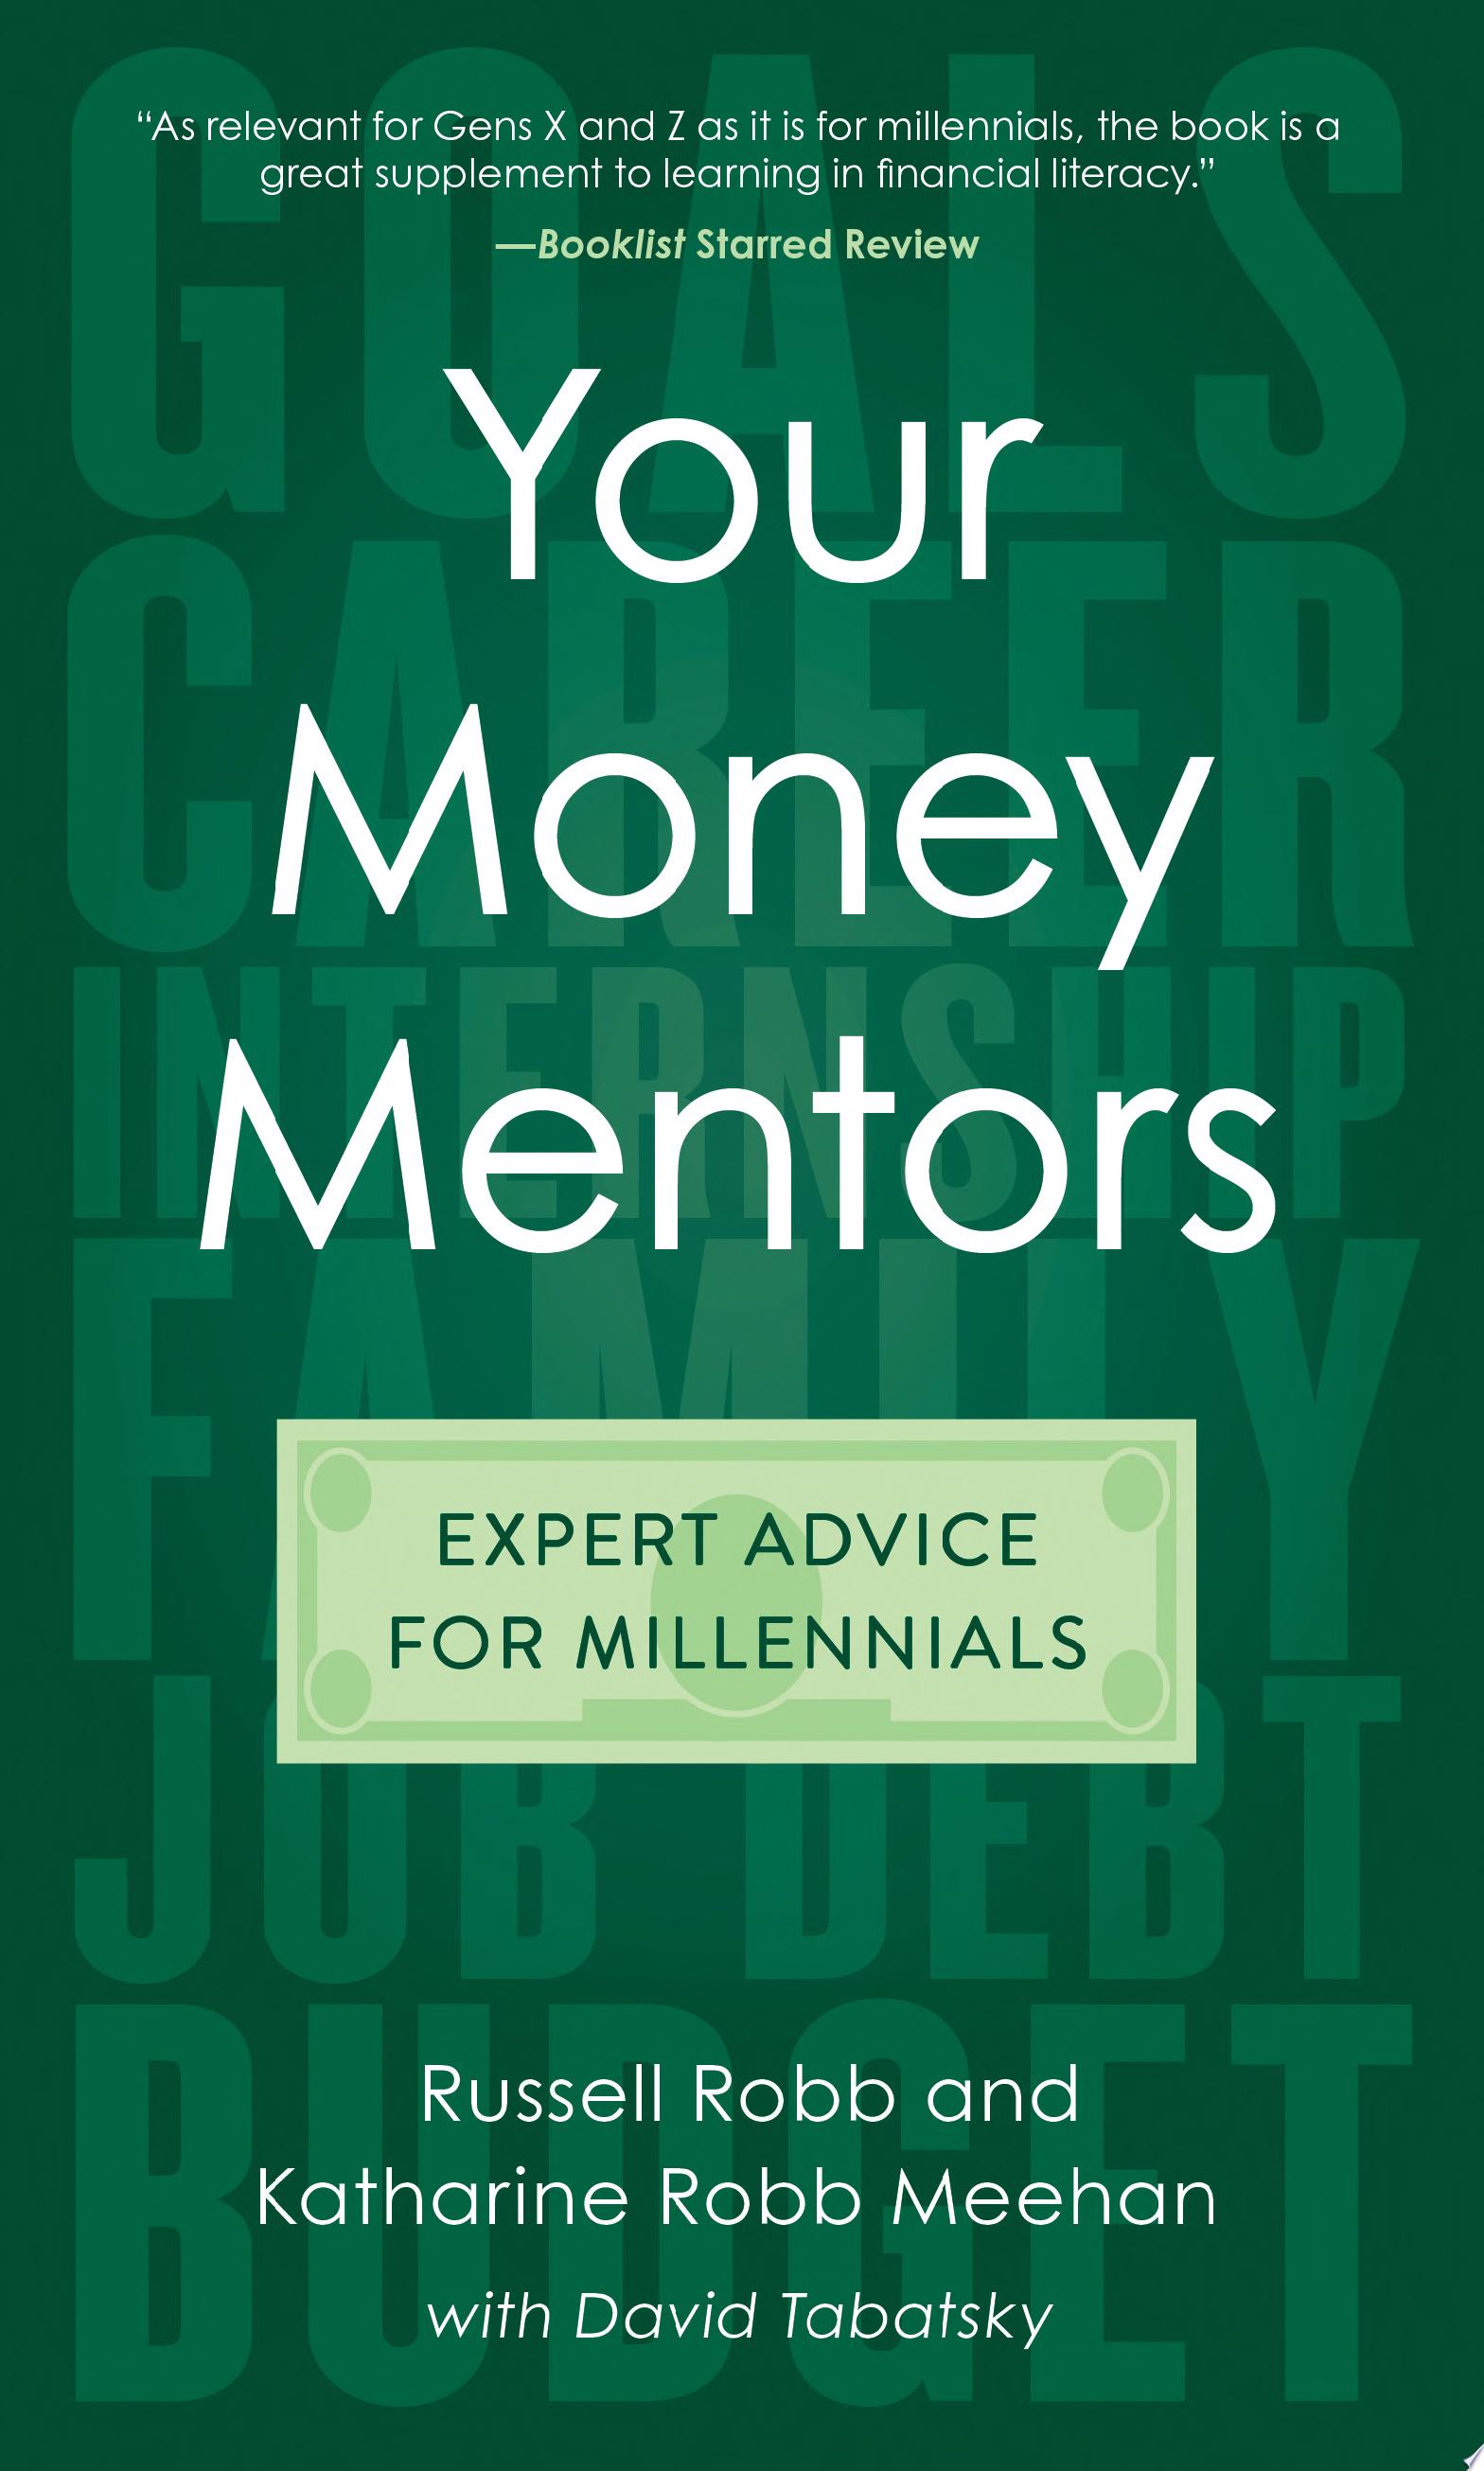 Image for "Your Money Mentors"